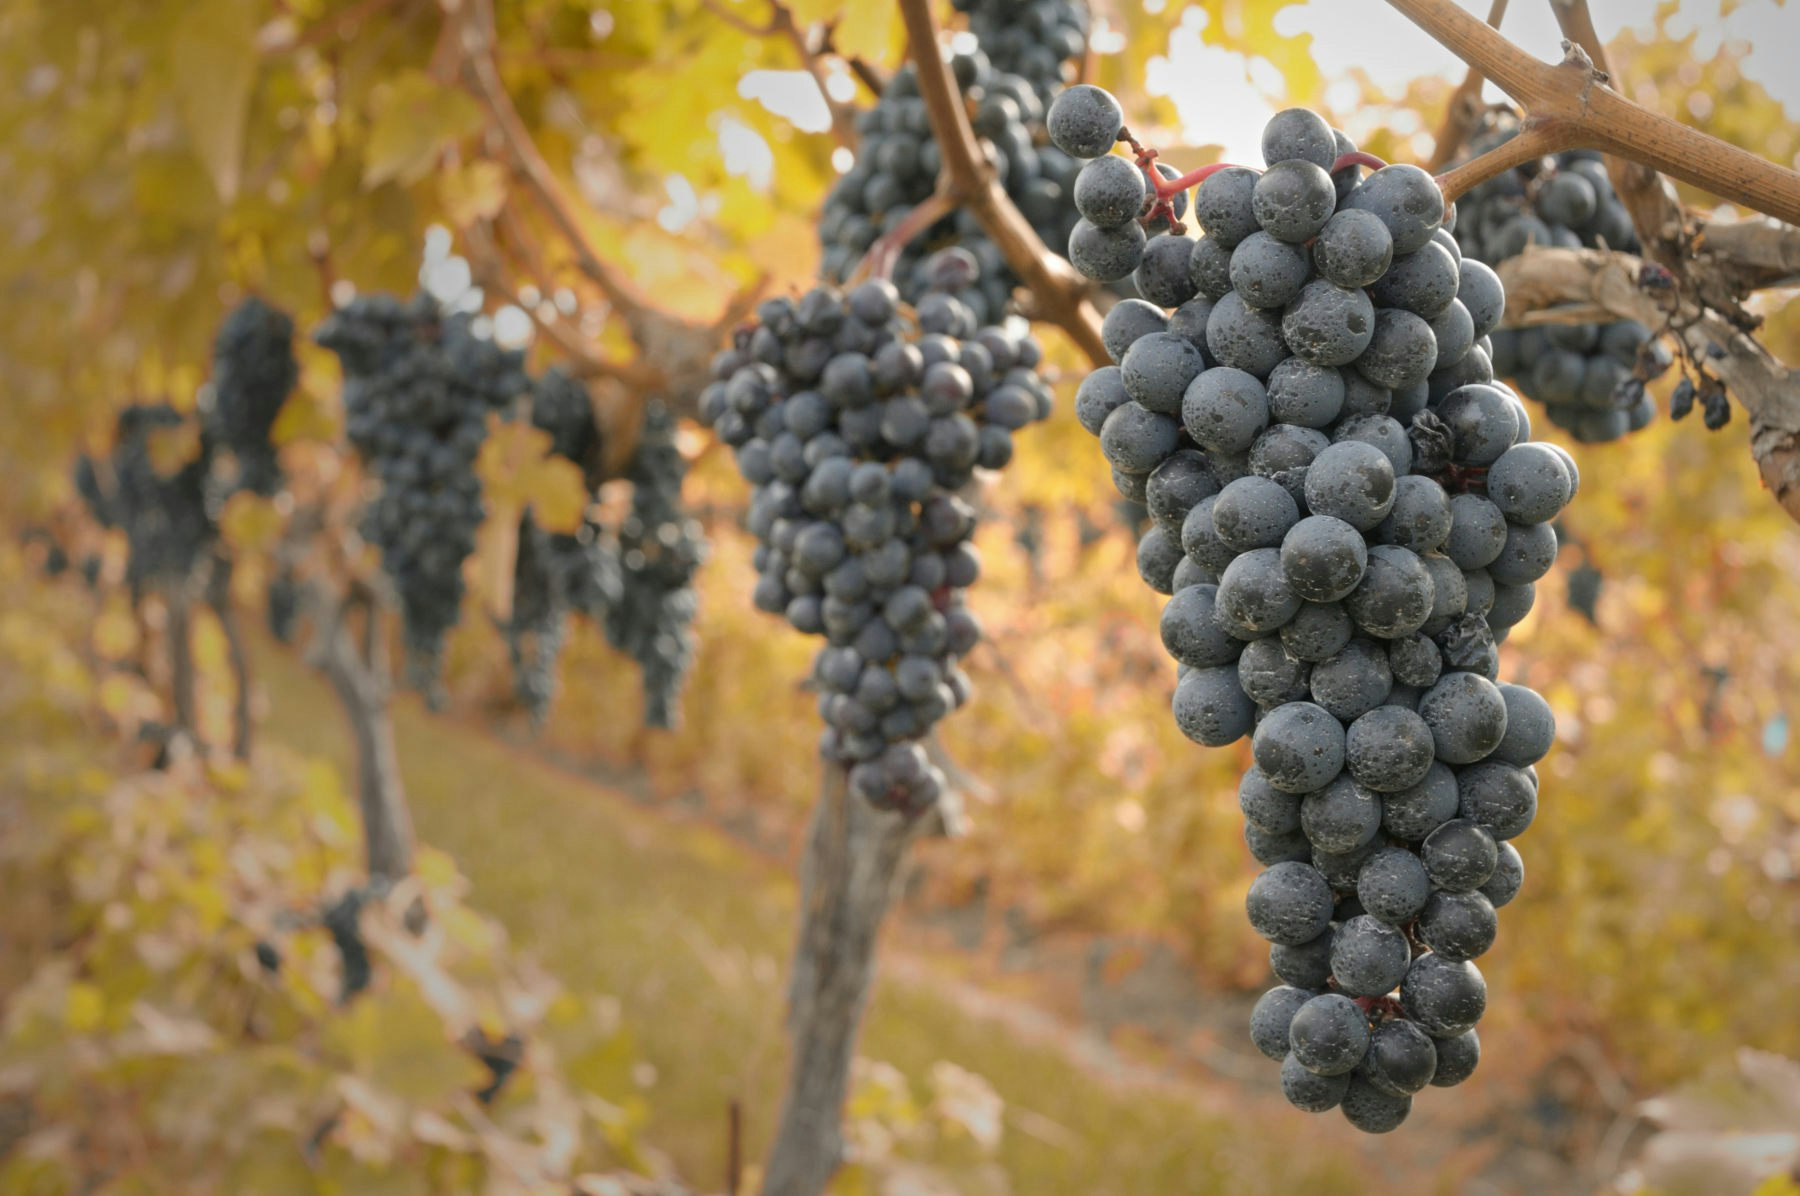 Fall foliage surrounds bunches of black grapes hanging from vines in Niagara-on-the-Lake, Canada